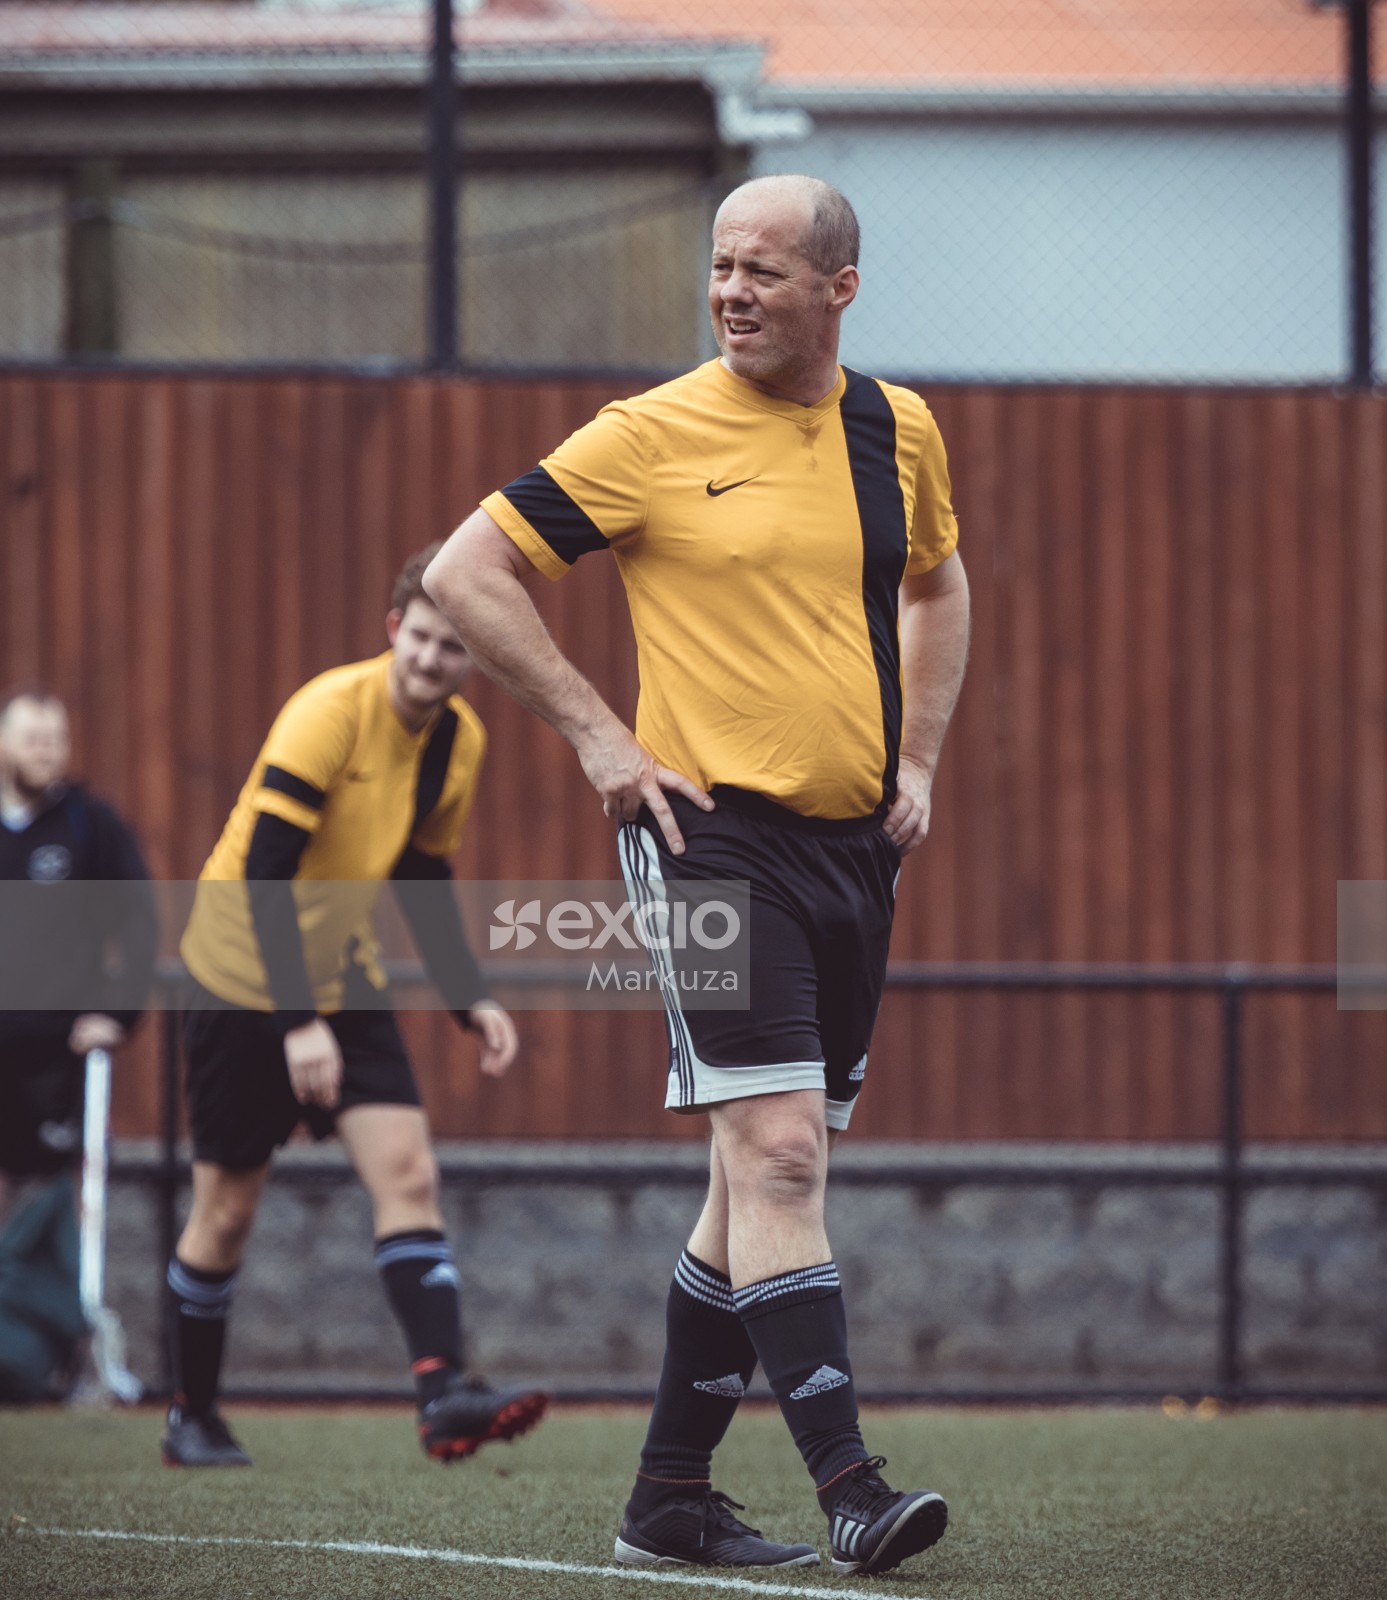 Bald soccer player looking back with arms on waist - Sports Zone sunday league